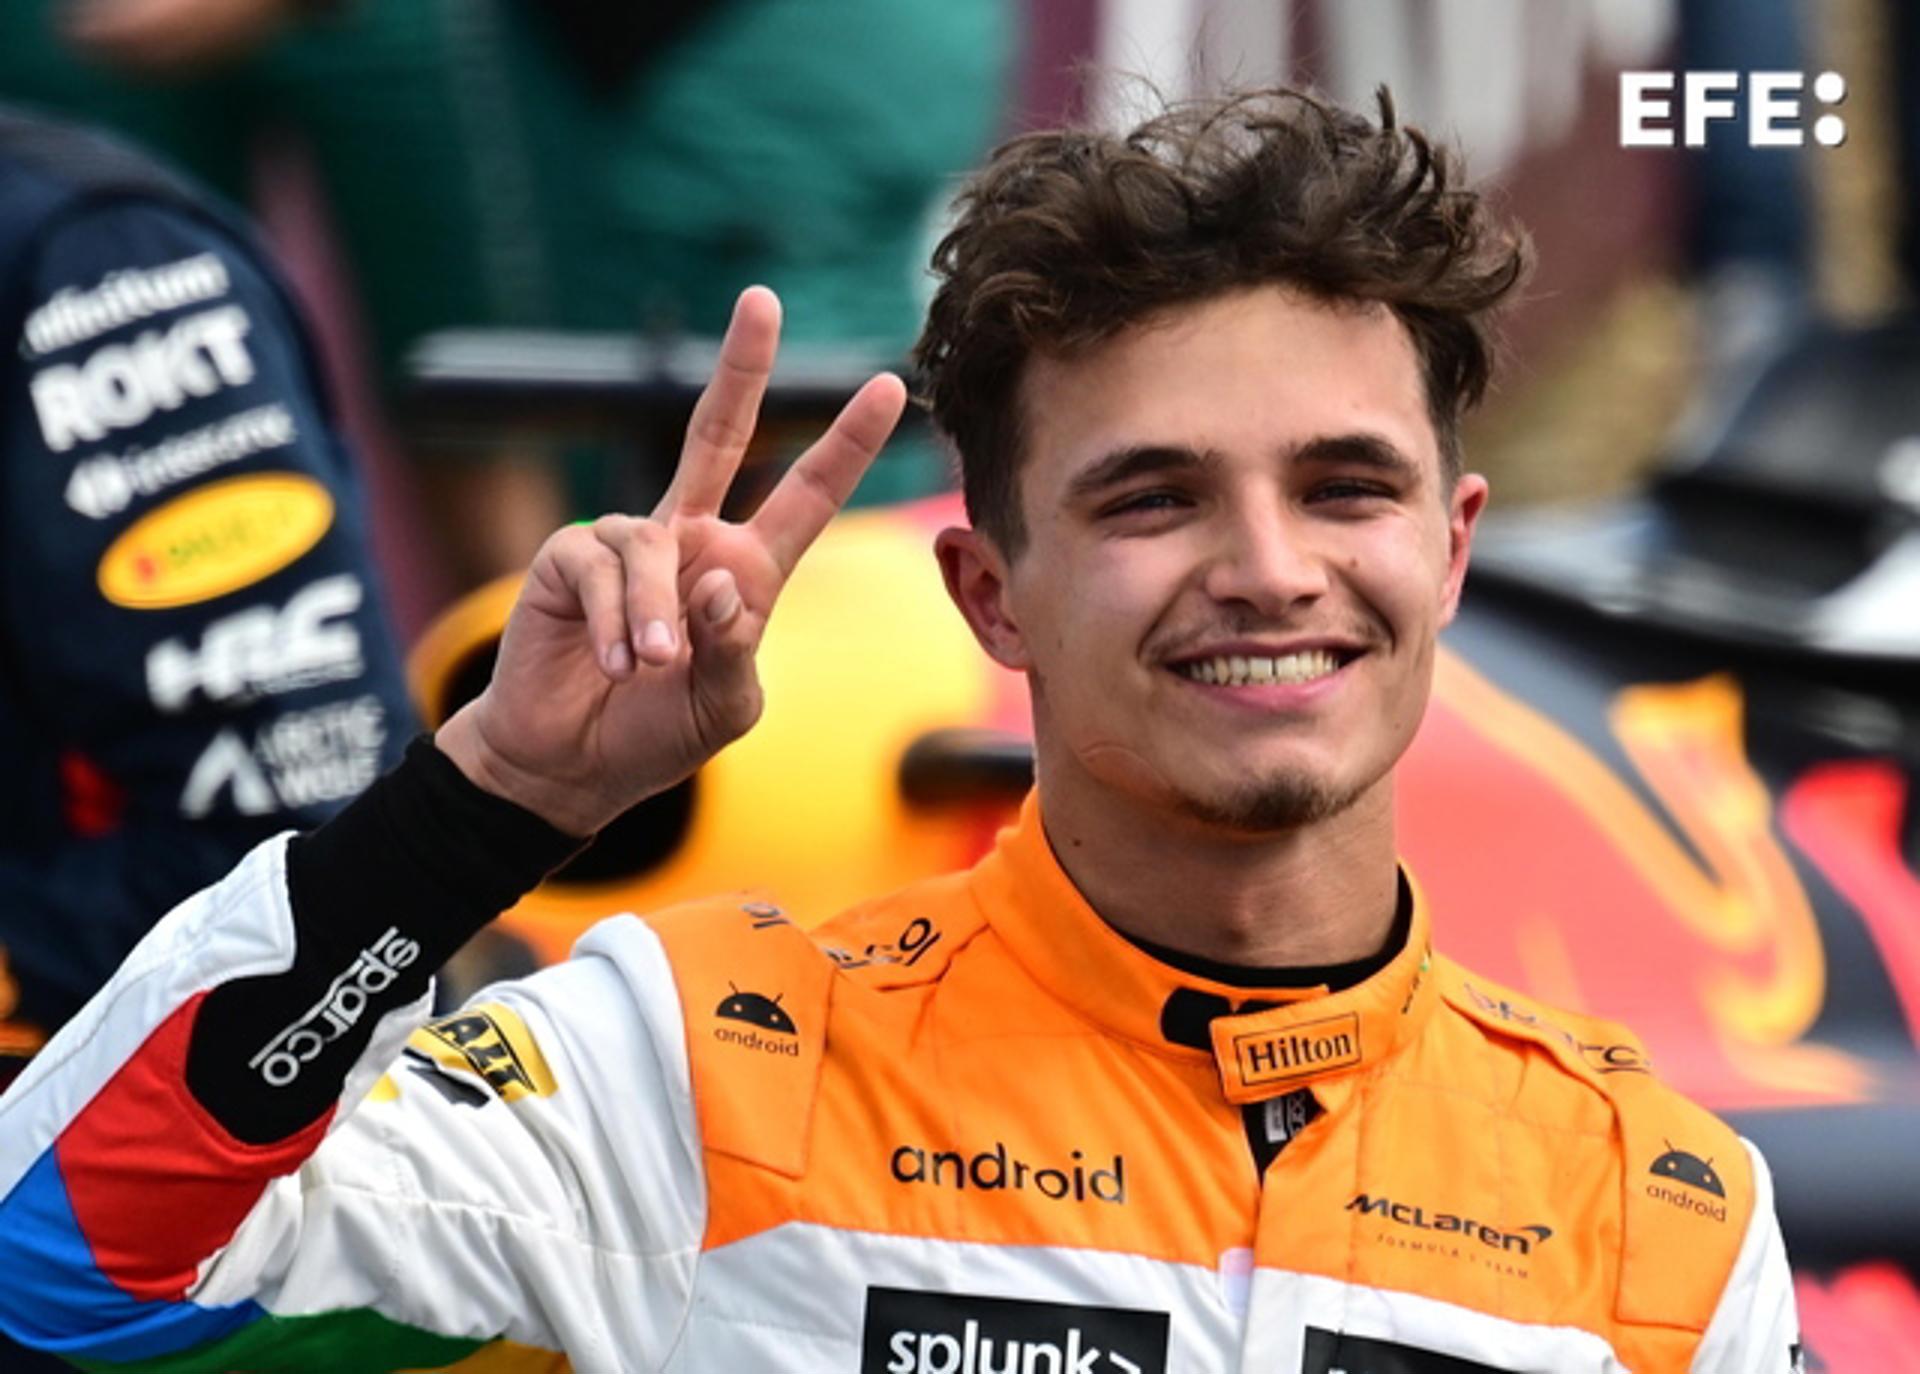 Lando Norris (McLaren) celebrates after finishing second in the Formula 1 British Grand Prix 2023 at the Silverstone Circuit in Silverstone, England, on 9 July 2023. EFE/EPA/CHRISTIAN BRUNA
